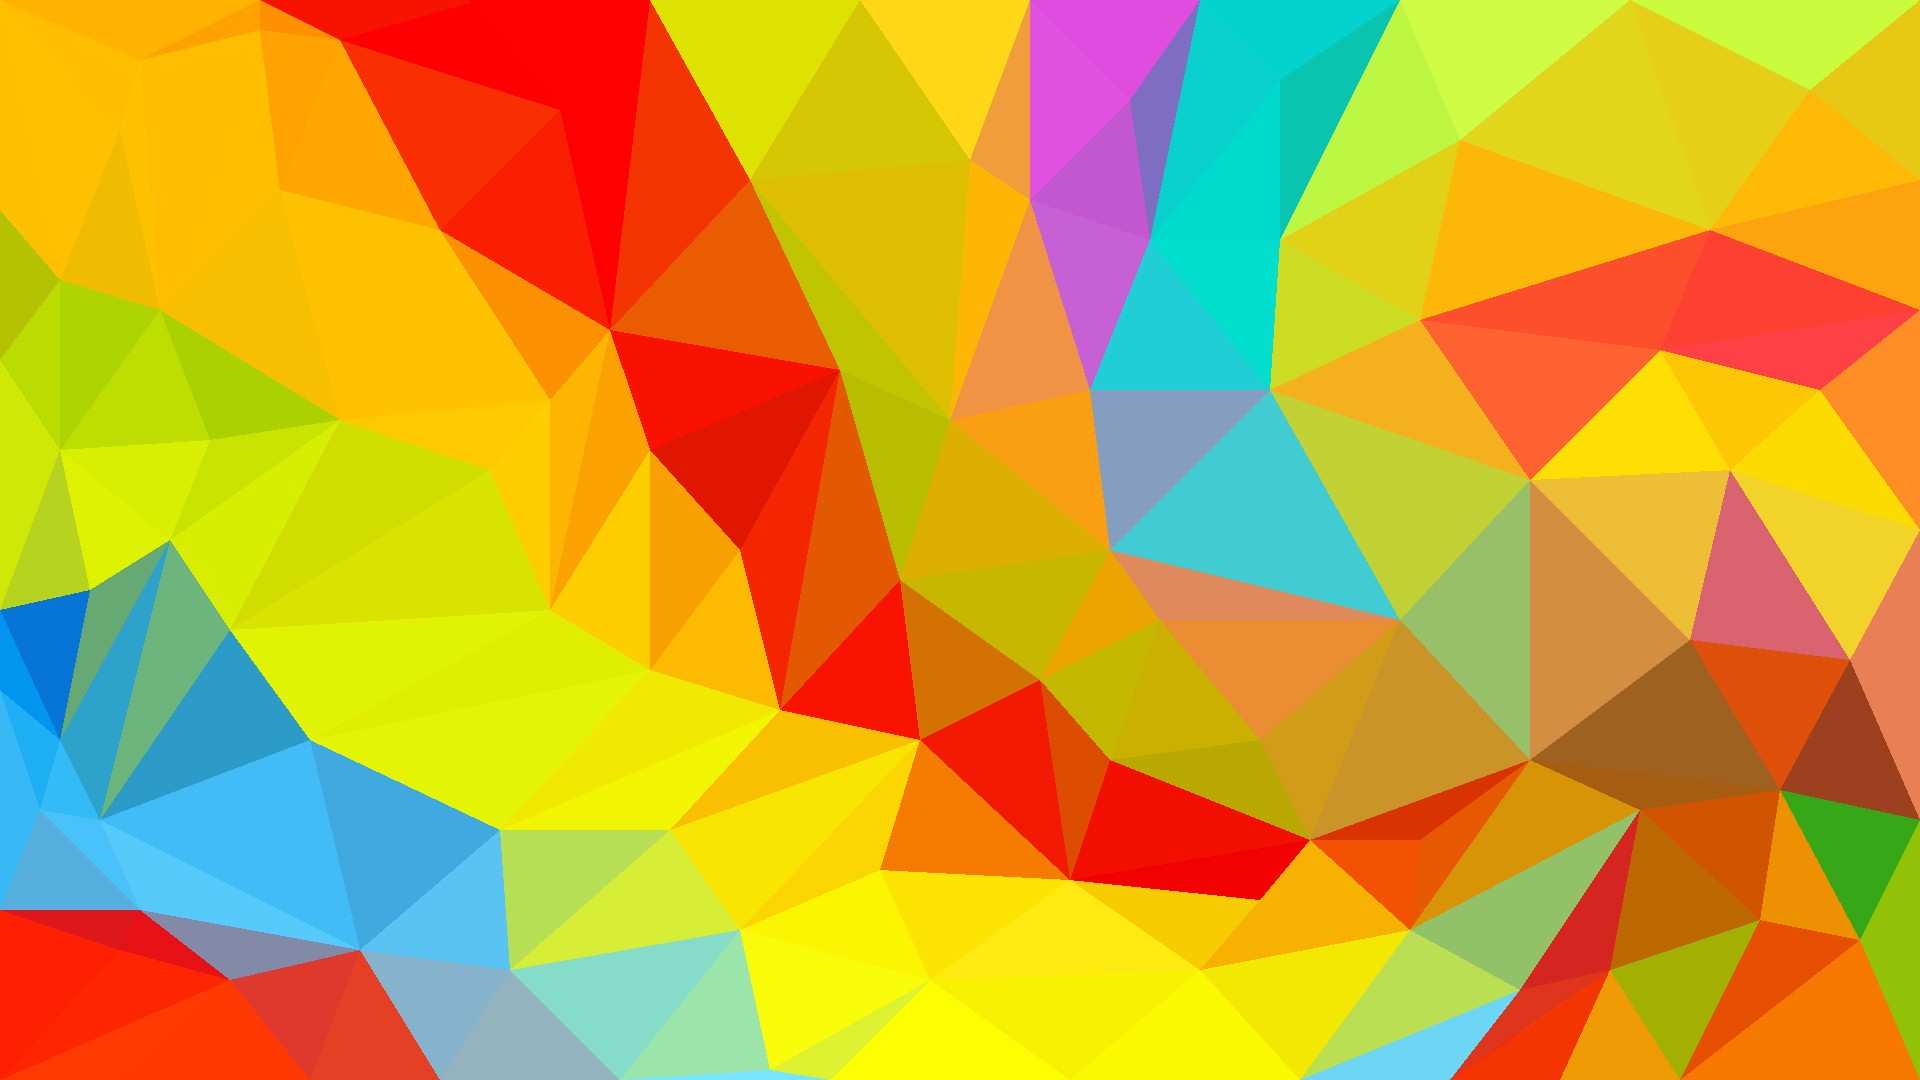 General 1920x1080 digital art colorful low poly abstract geometric figures